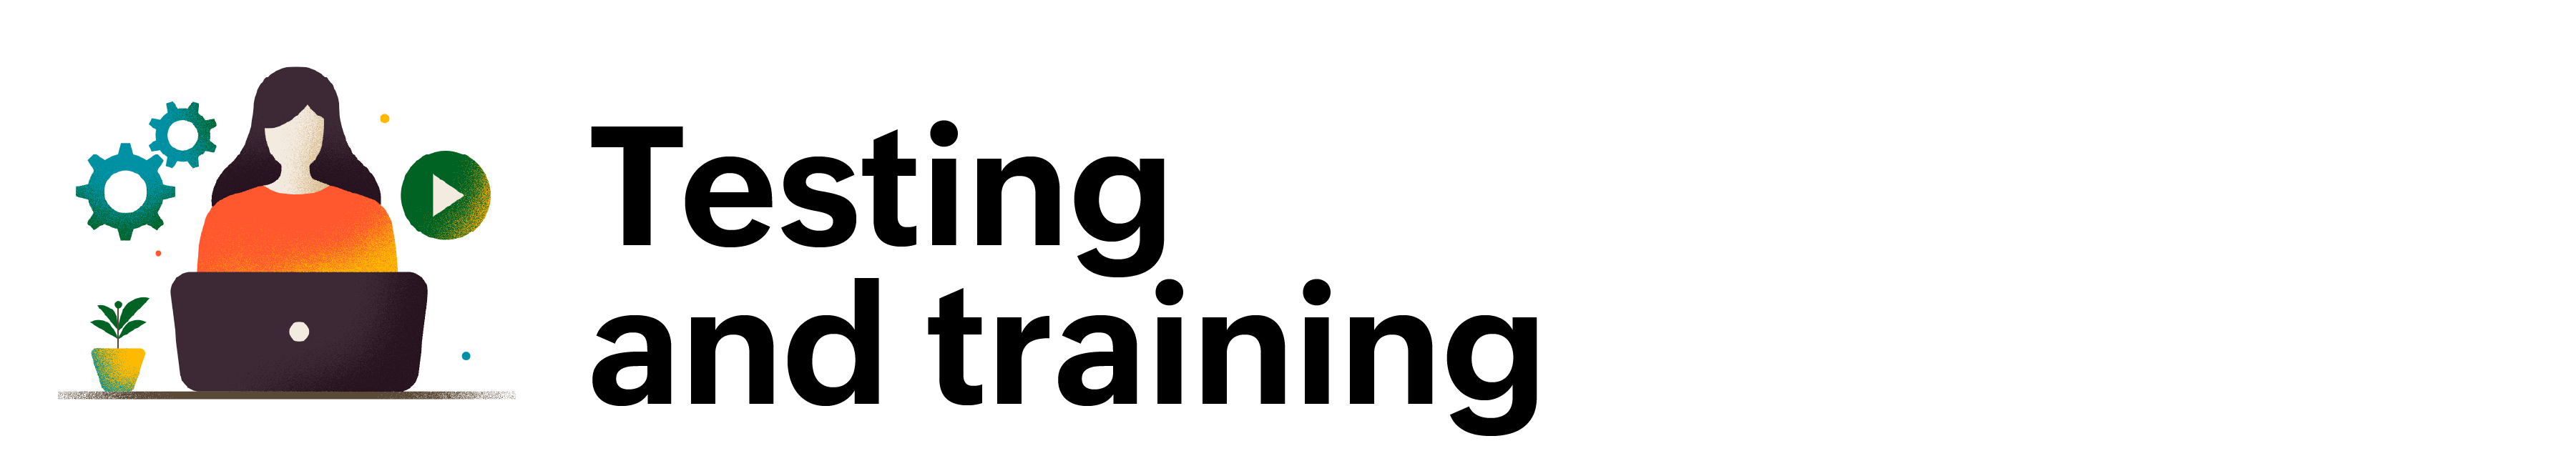 Testing and training in Saas.